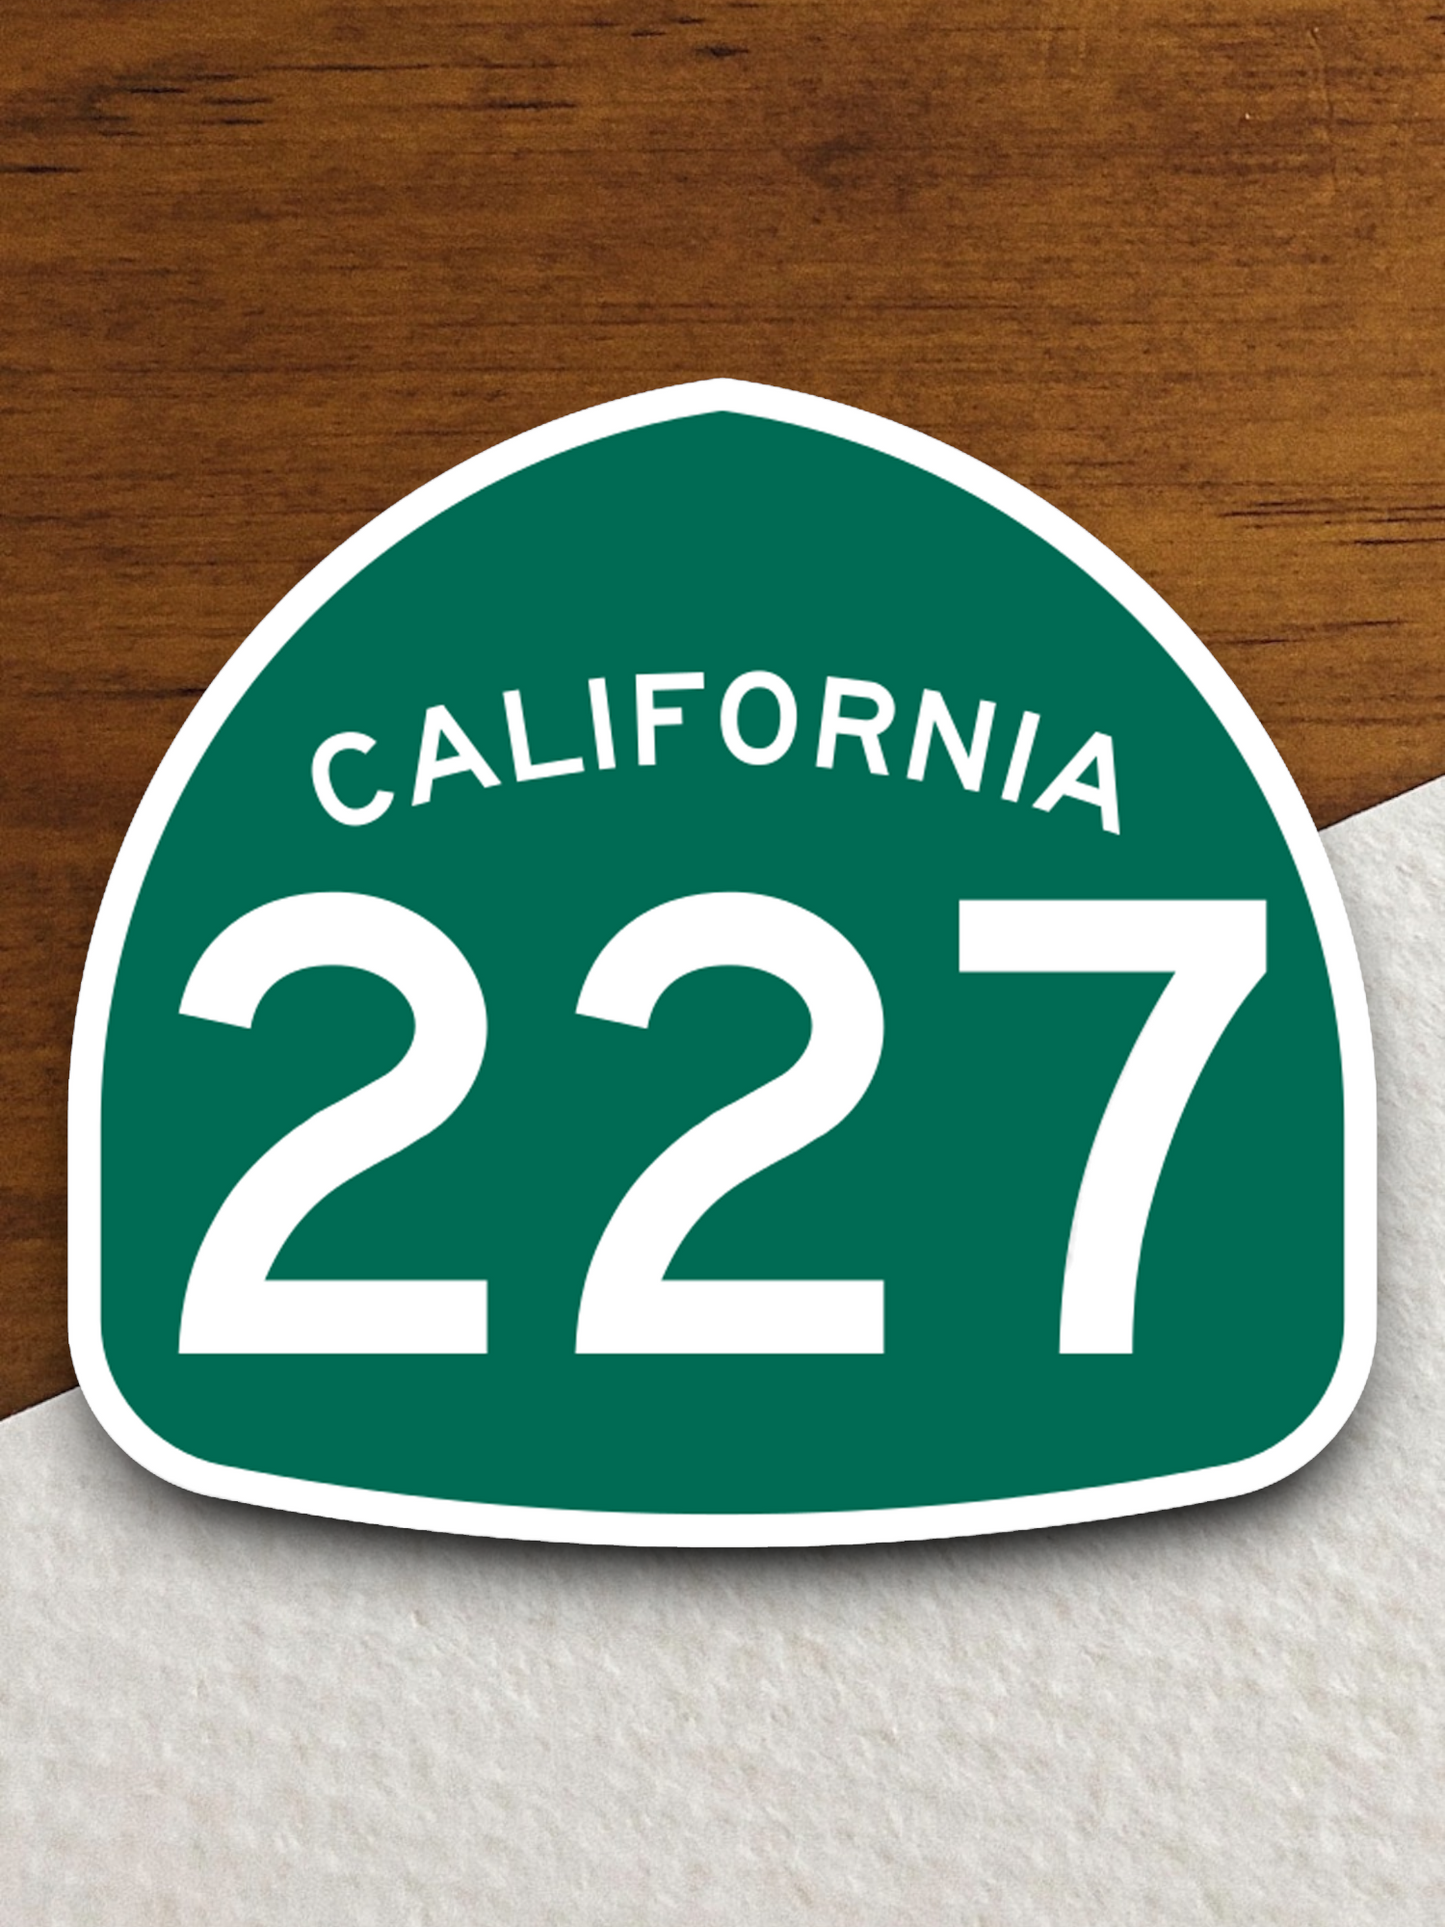 California State Route 227 Road Sign Sticker